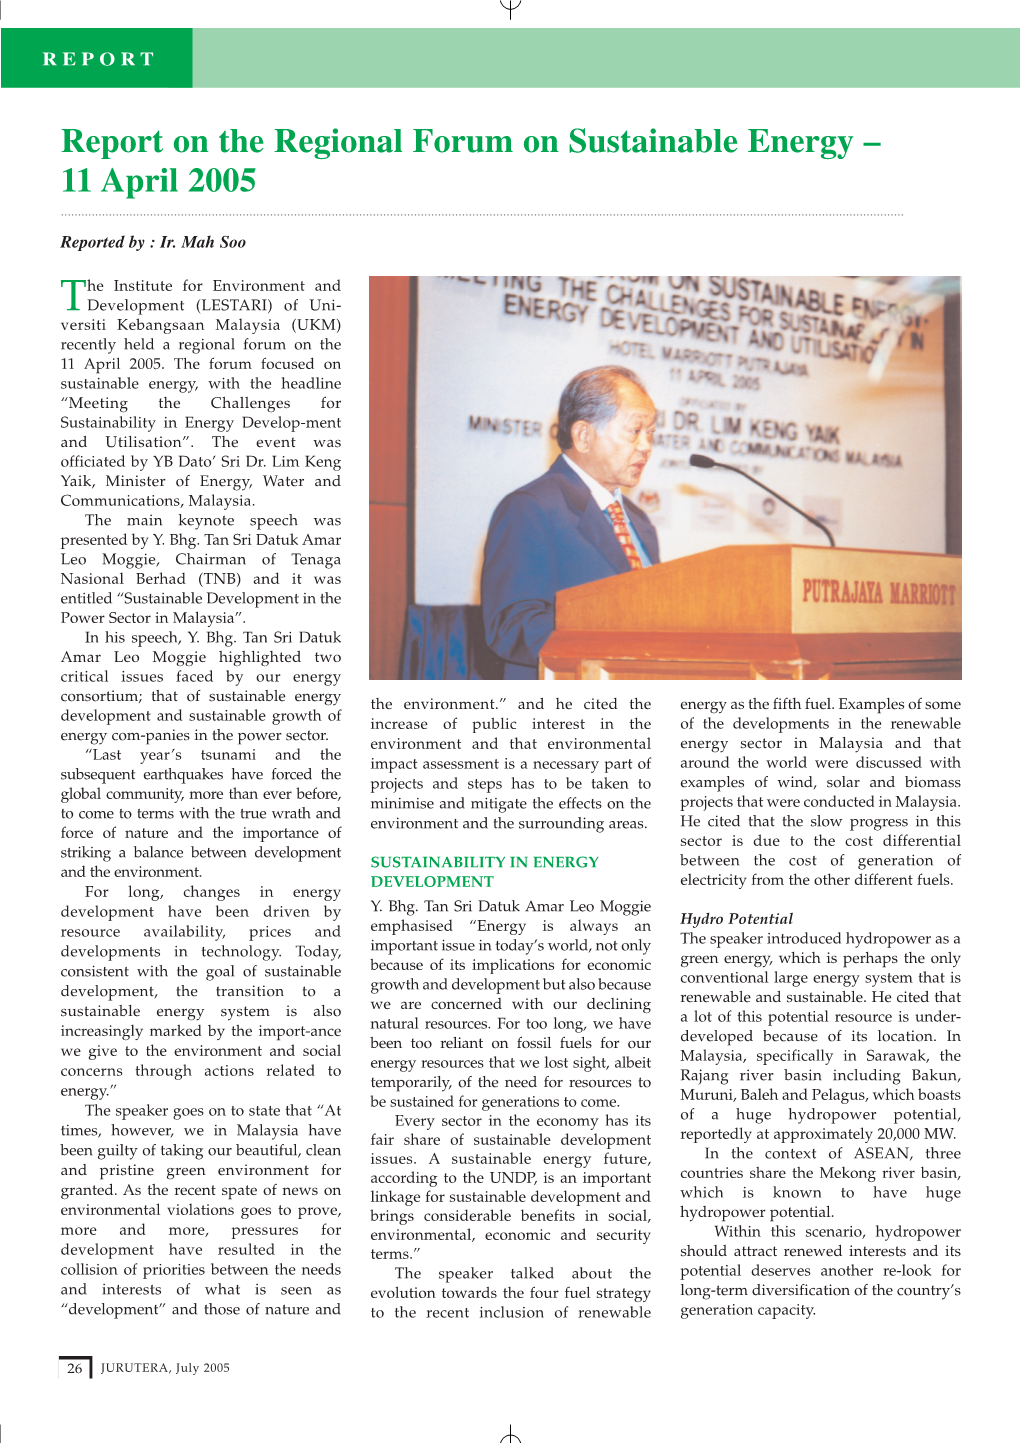 Report on the Regional Forum on Sustainable Energy – 11 April 2005